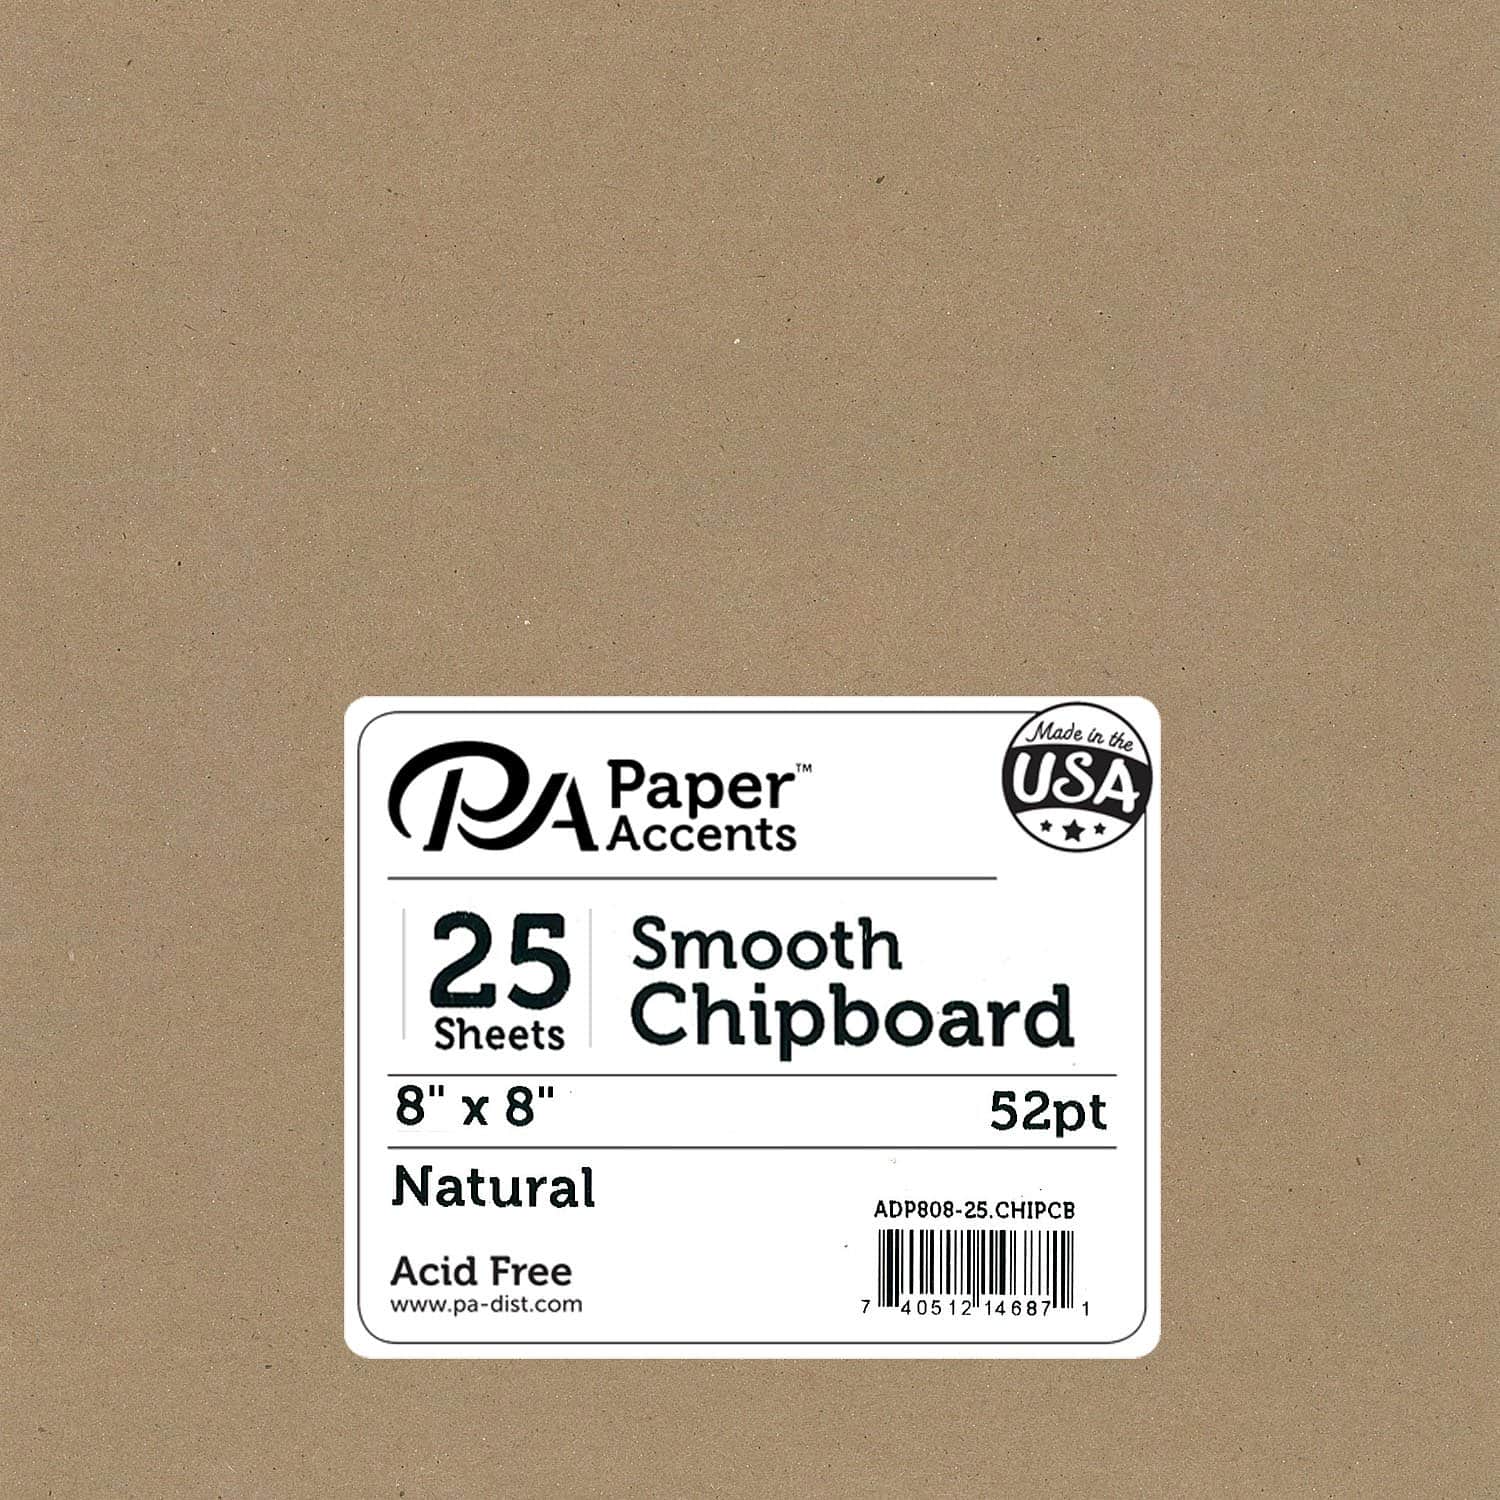 PA Paper&#x2122; Accents Natural 8&#x22; x 8&#x22; Smooth Chipboard, 25 Sheets